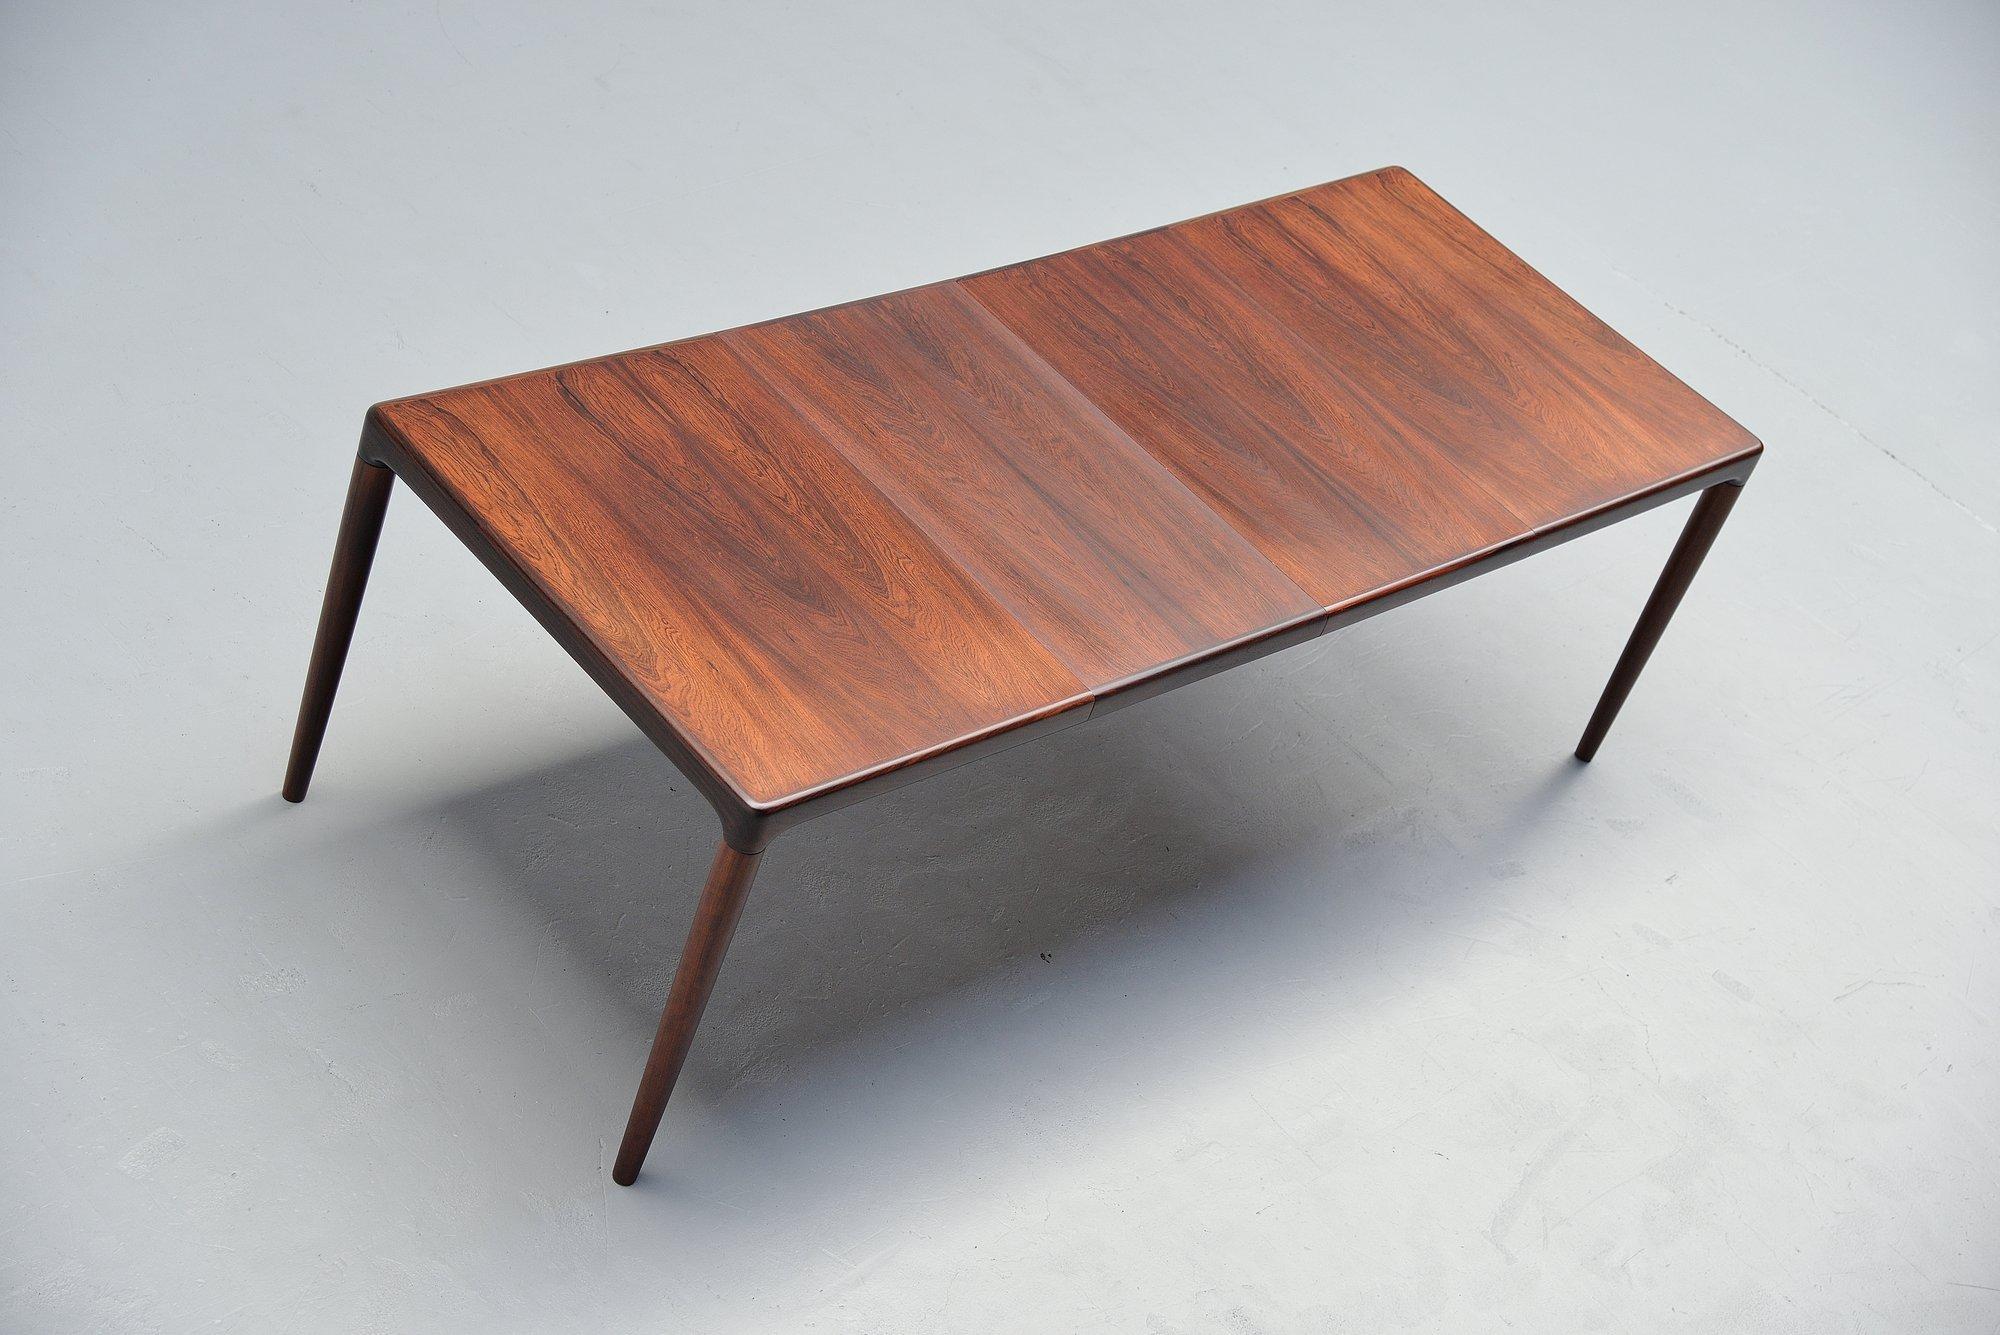 Very nice Minimalist dining table designed and manufactured by Bramin, Denmark 1960. This rosewood dining table has a very nice and warm rosewood color. The table is extendable using the 2 extenstion leafs. Very nice functional large dining table.